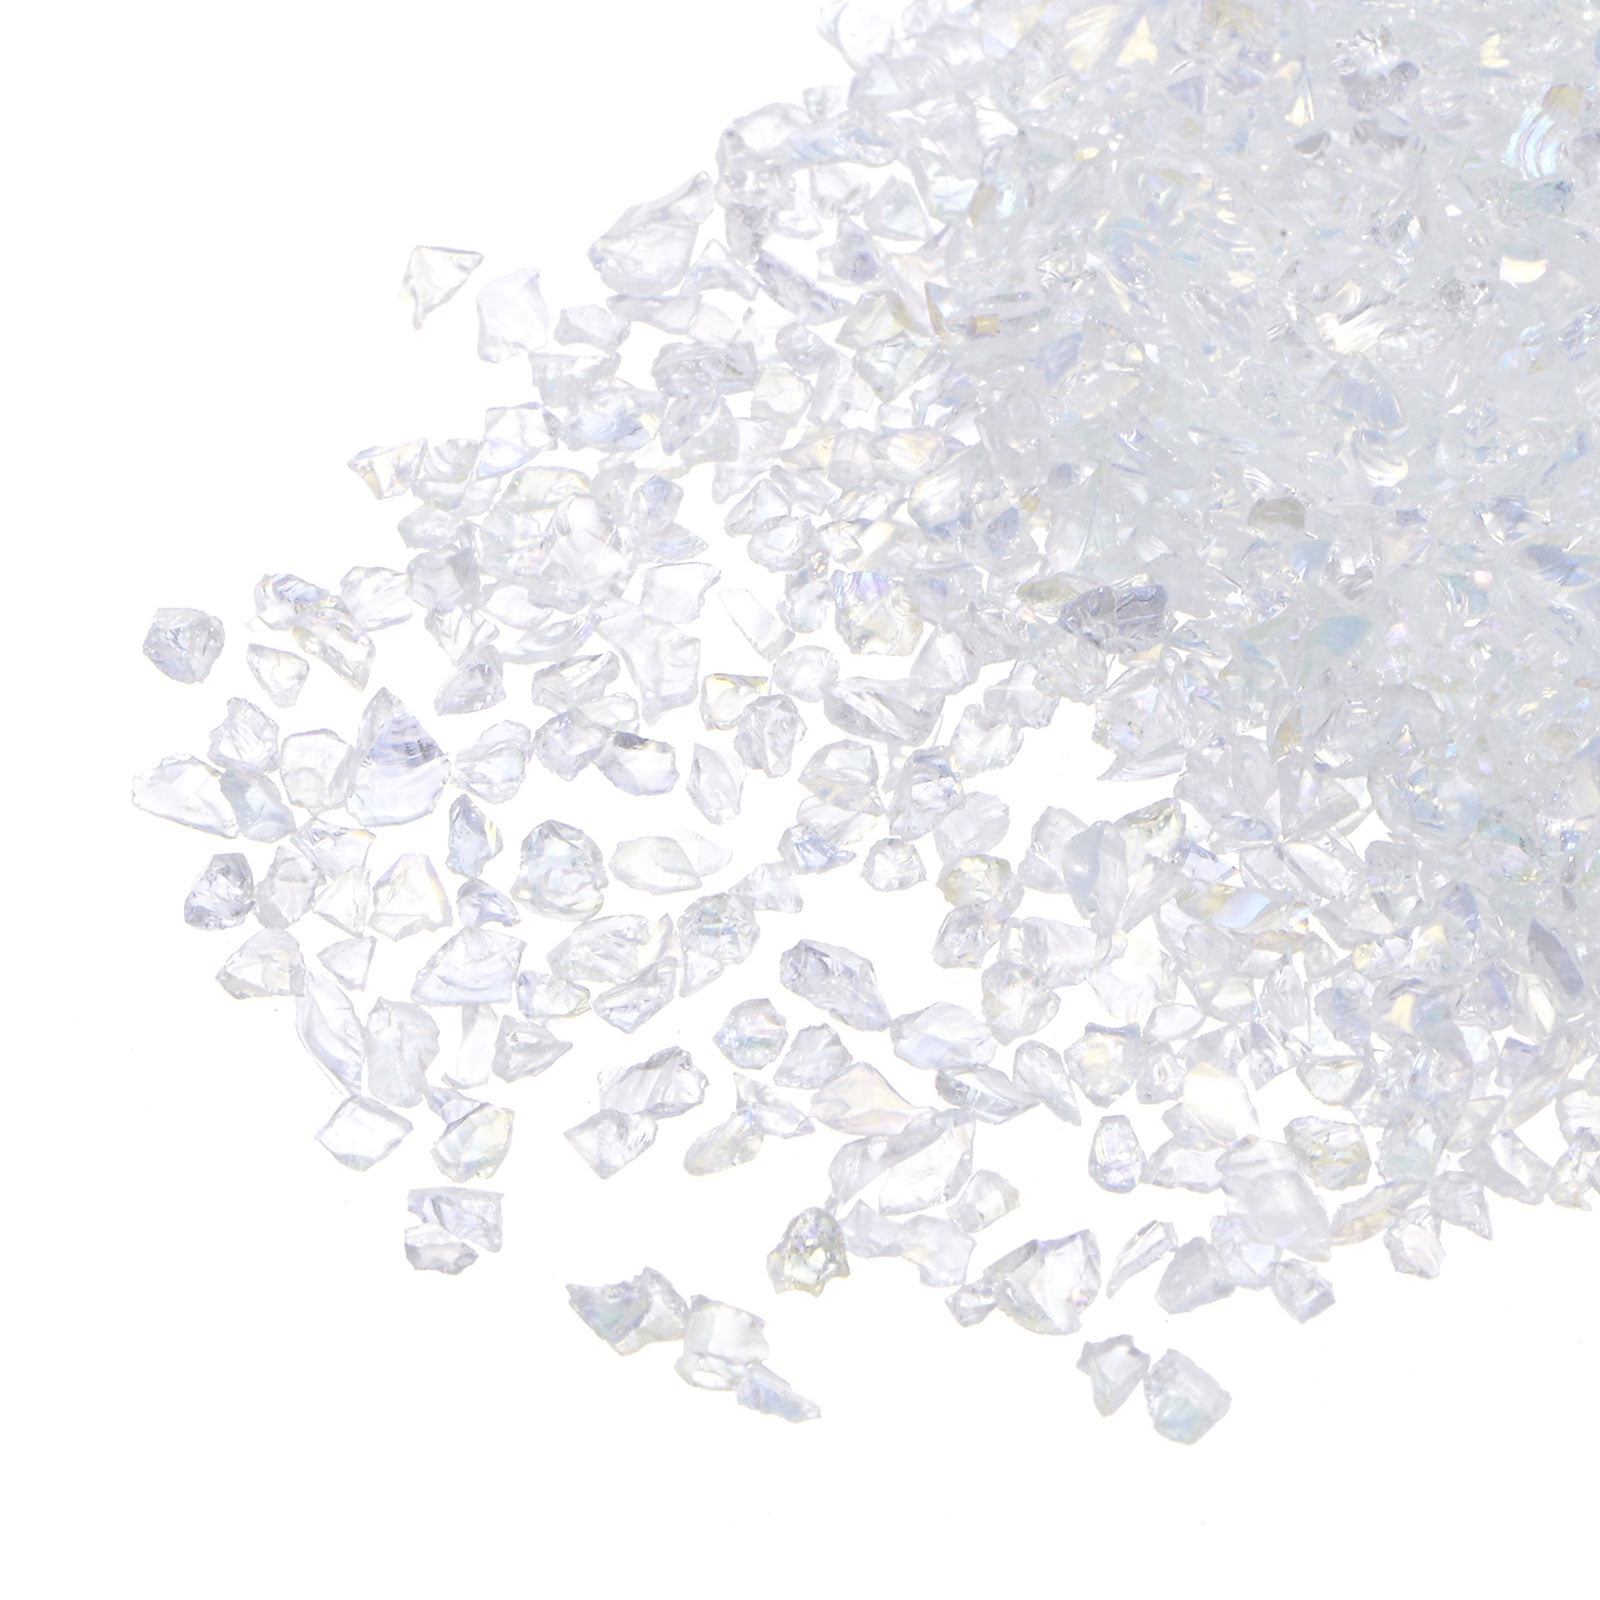 2-4mm Crushed Glass for Crafts Crushed Glass Resin Glitter DIY